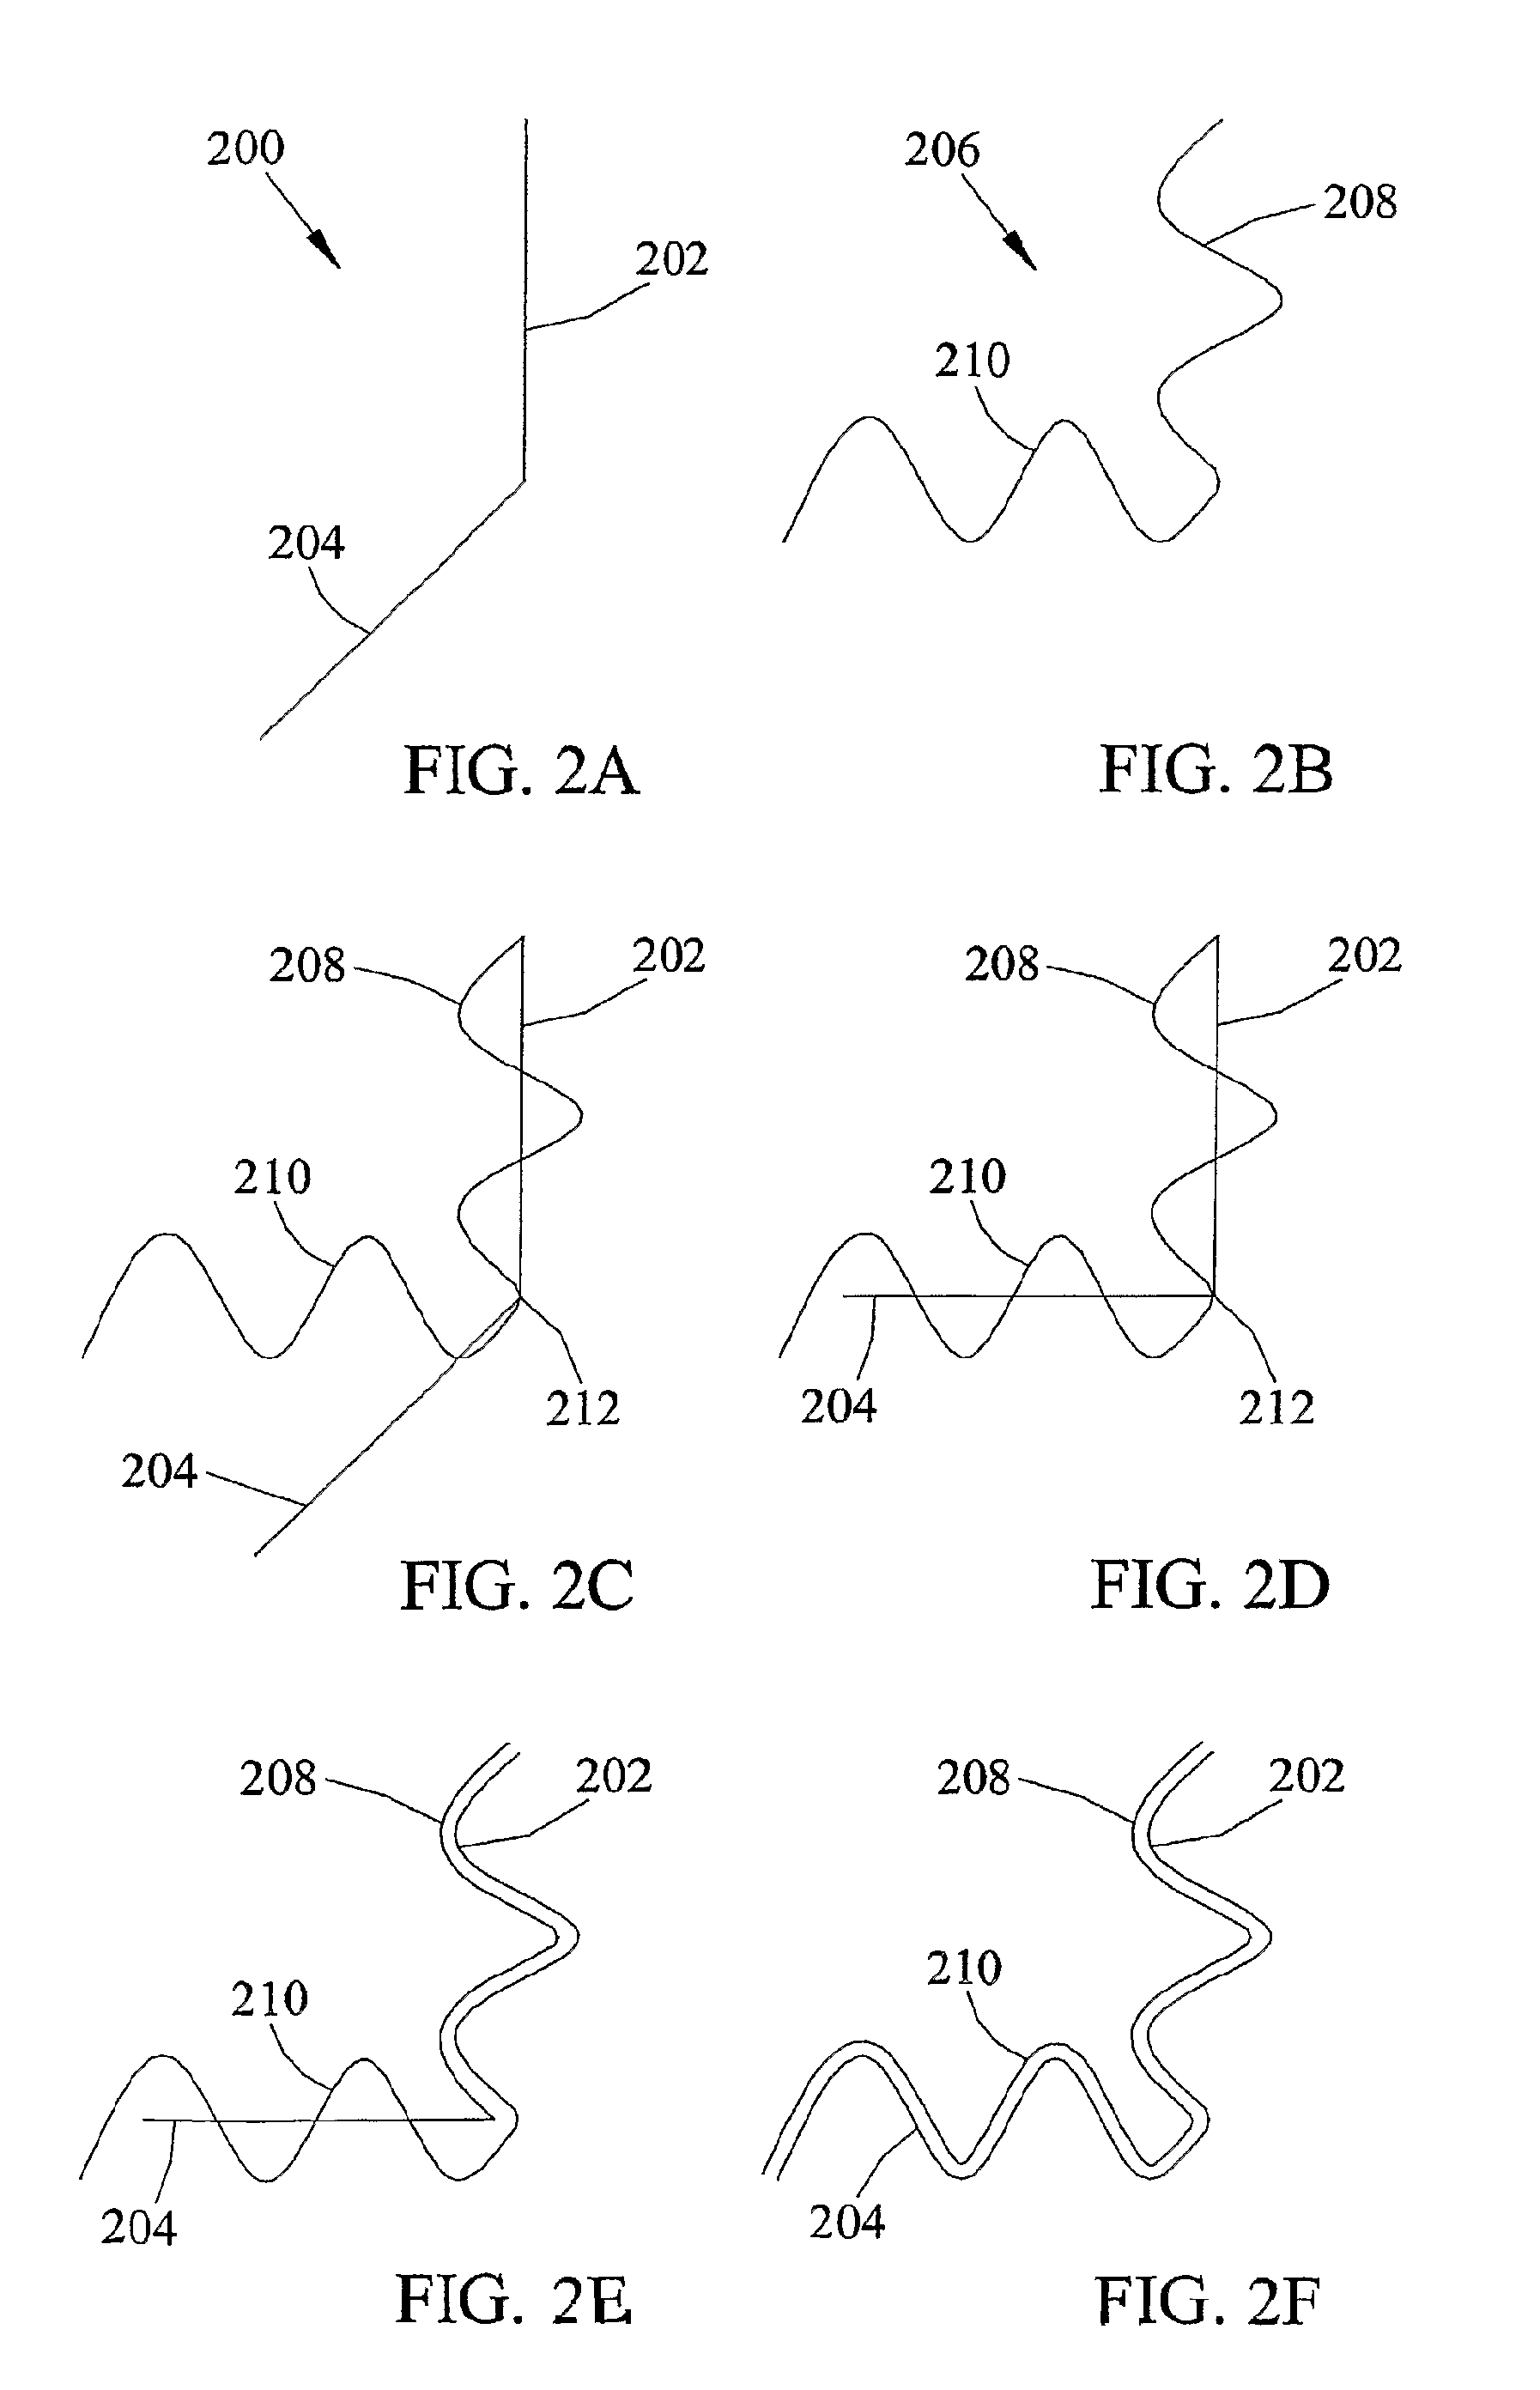 Methods, systems, and computer program products for hierarchical registration between a blood vessel and tissue surface model for a subject and a blood vessel and tissue surface image for the subject